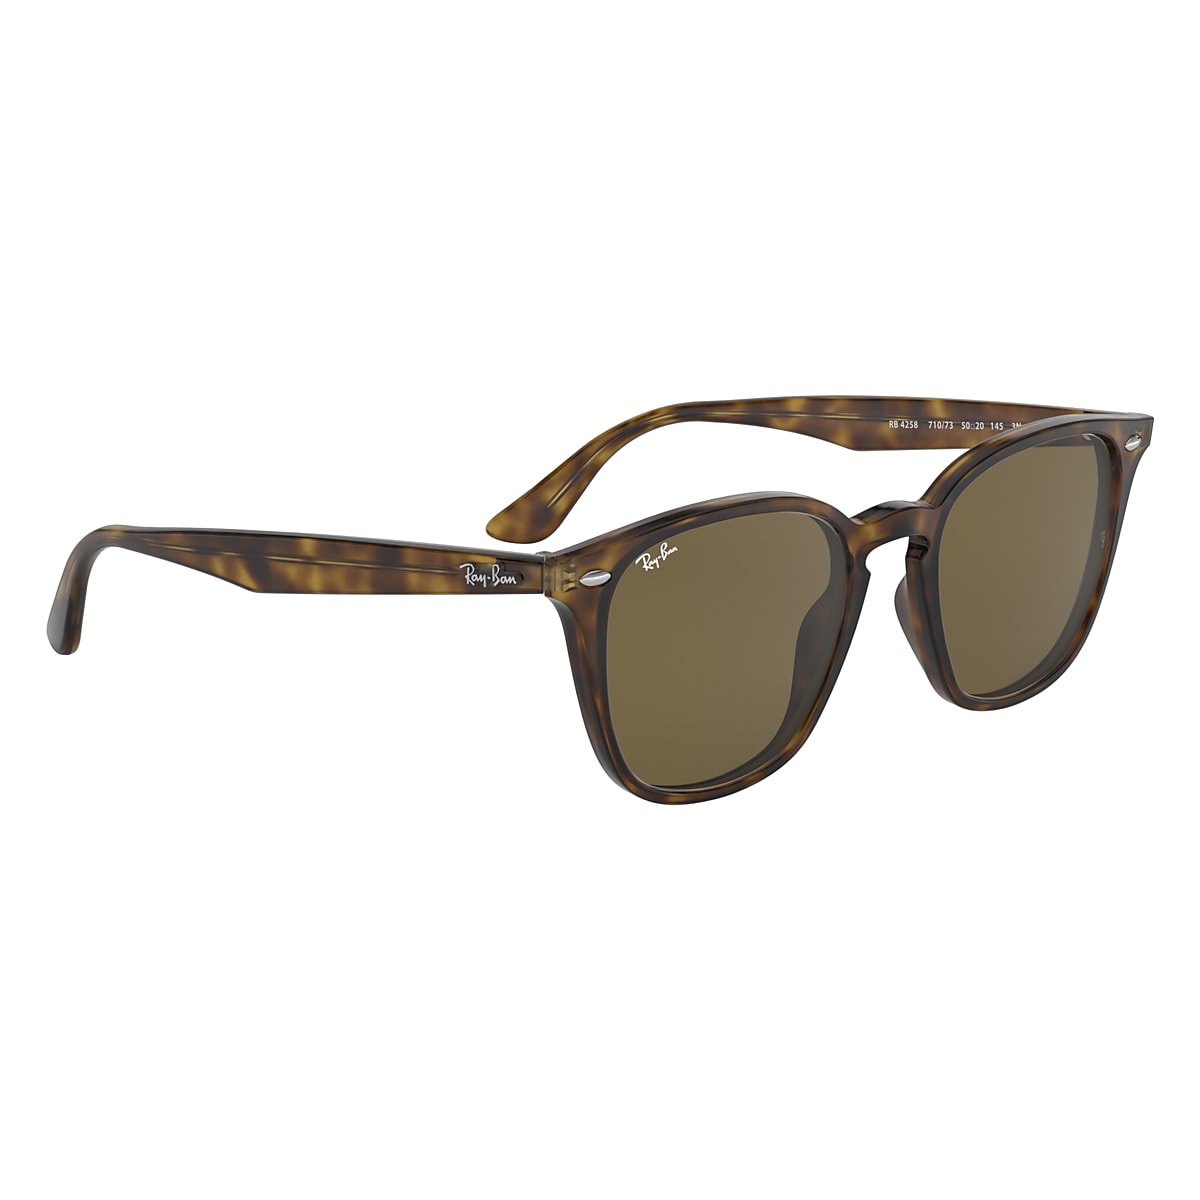 RB4258 Sunglasses in Light Havana and Brown - RB4258 | Ray-Ban® US